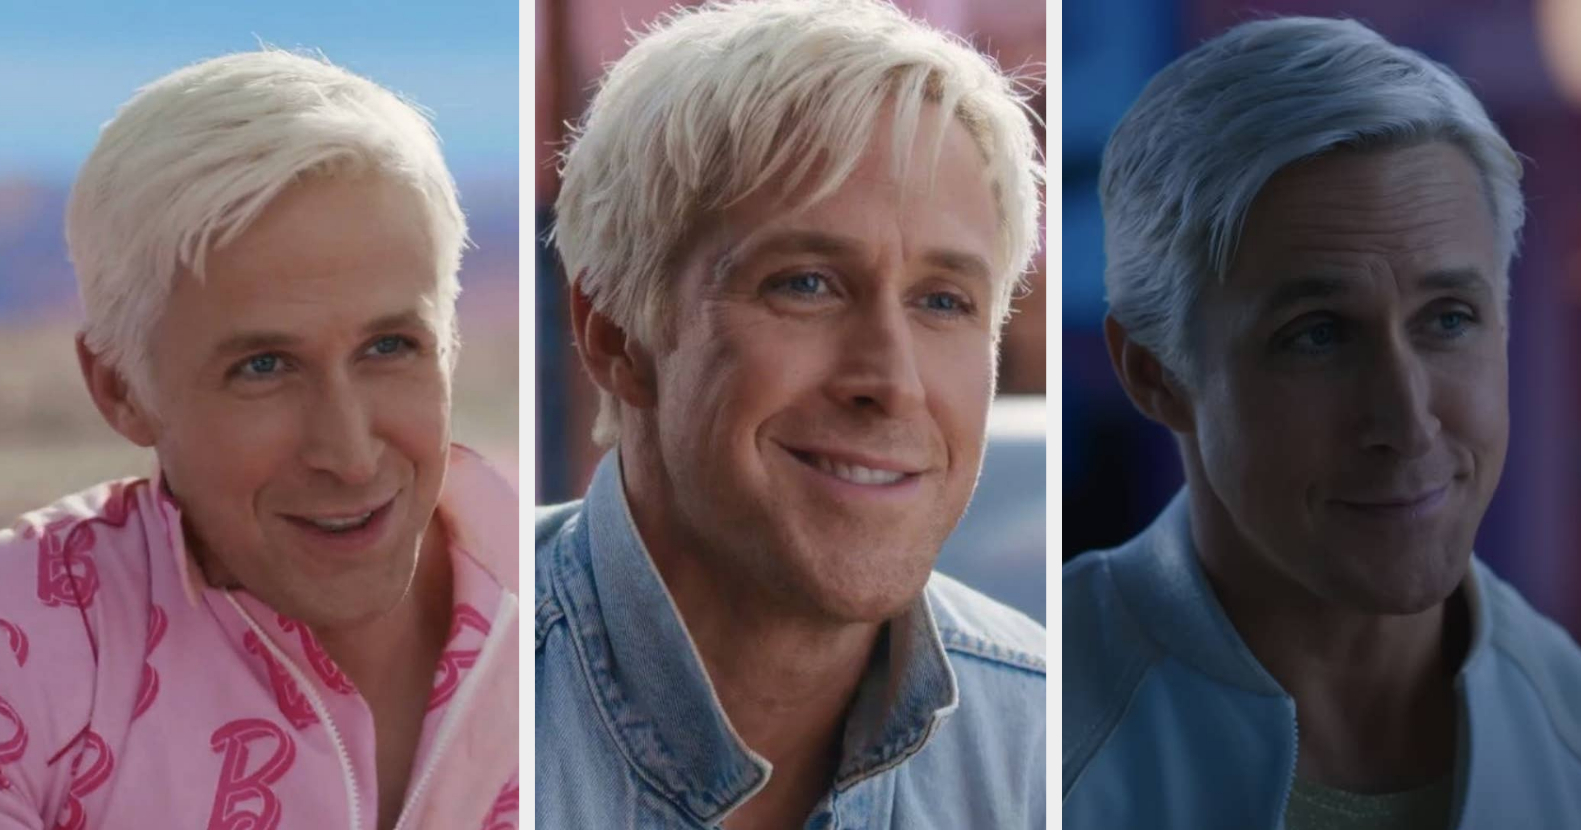 People Are Saying Ryan Gosling Is Too Old To Play Ken In "Barbie," And It Reeks Of Ageism